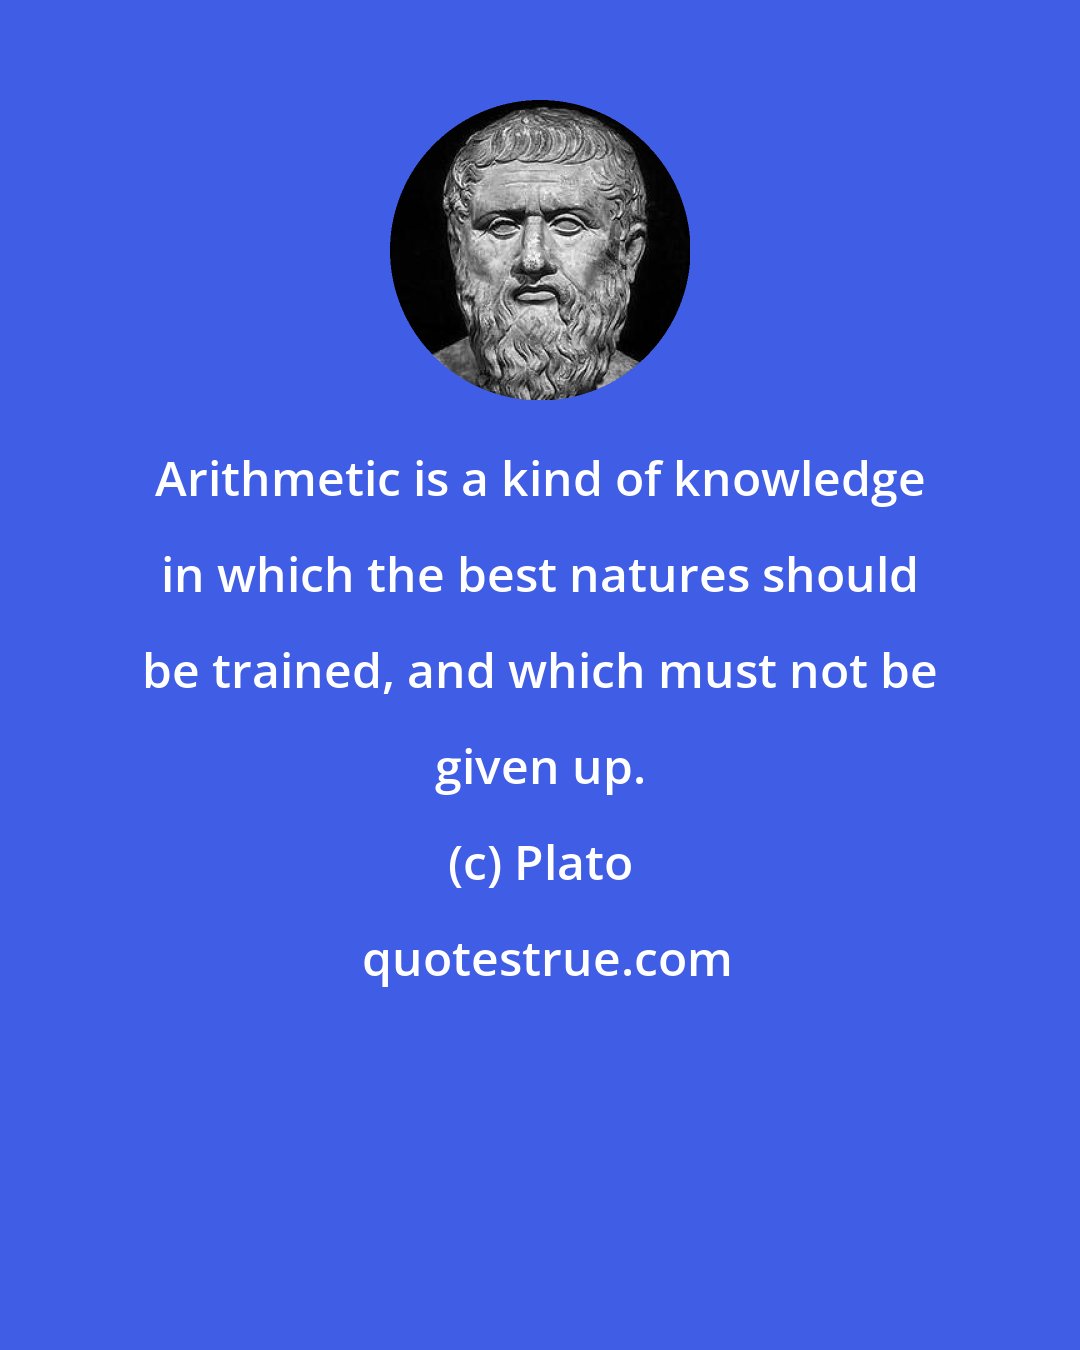 Plato: Arithmetic is a kind of knowledge in which the best natures should be trained, and which must not be given up.